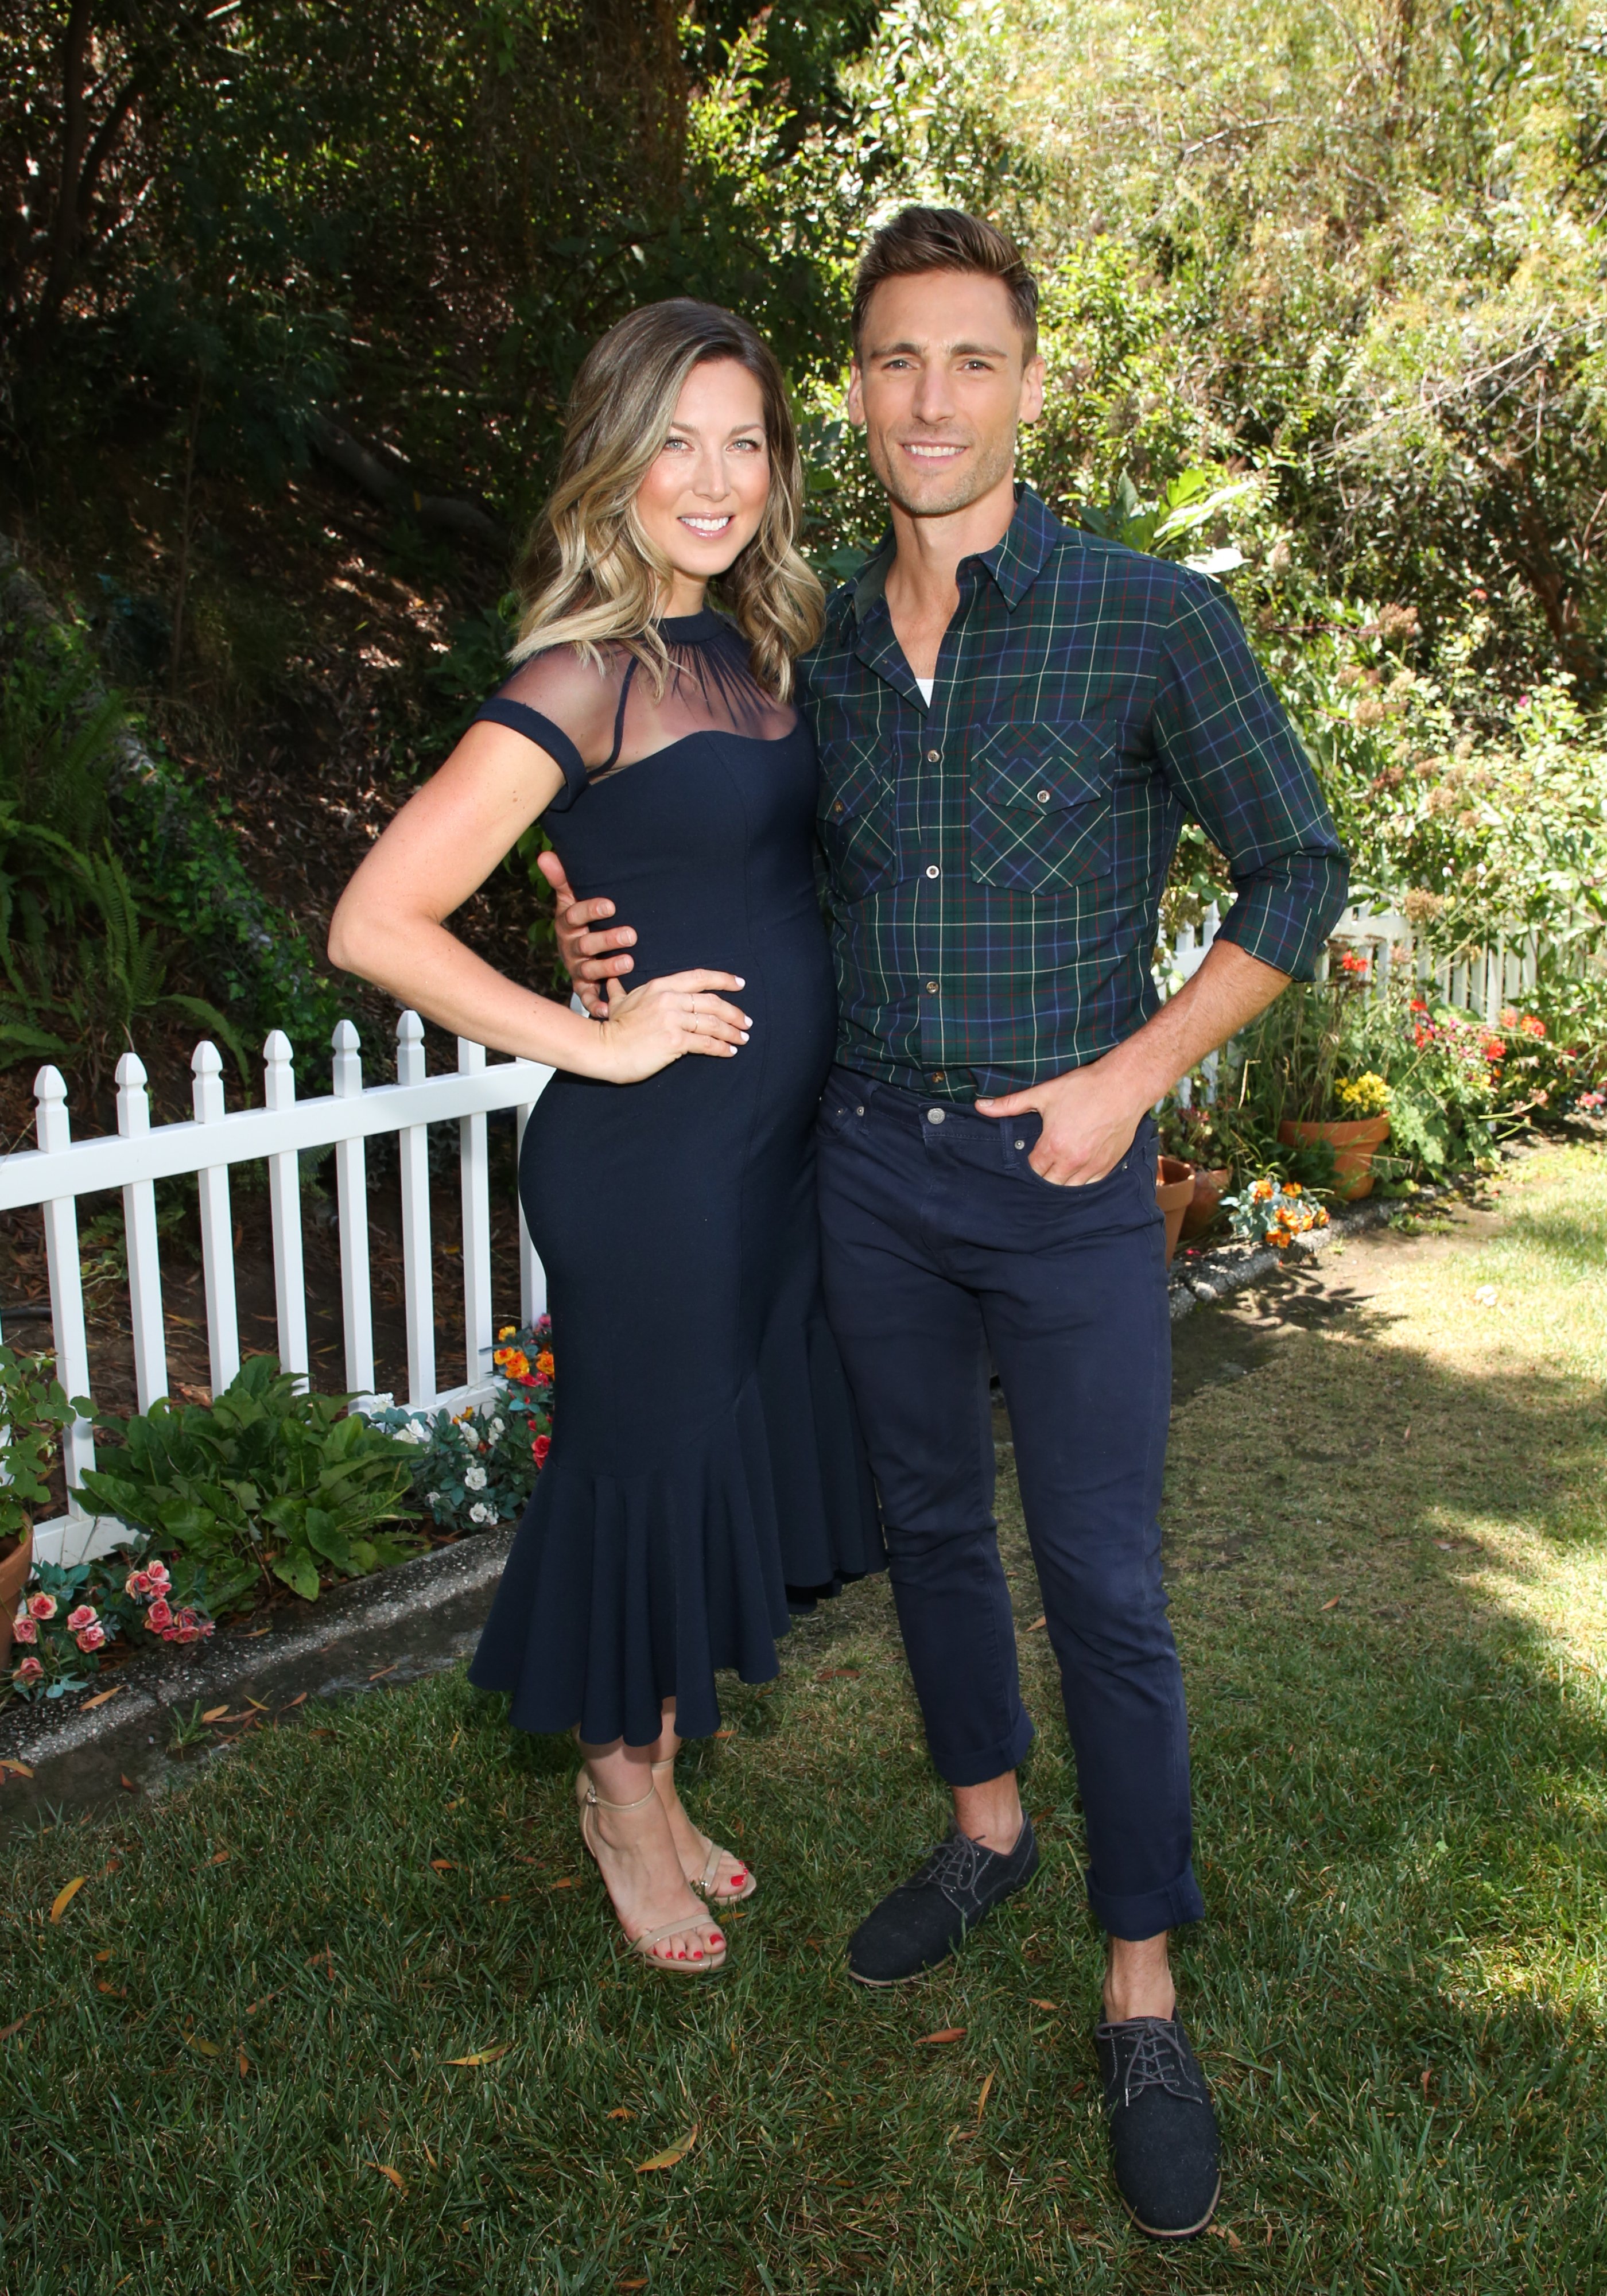 Andrew Walker and Cassandra Troy at Hallmark's "Home & Family" at Universal Studios Hollywood on July 15, 2019, in California | Source: Getty Images